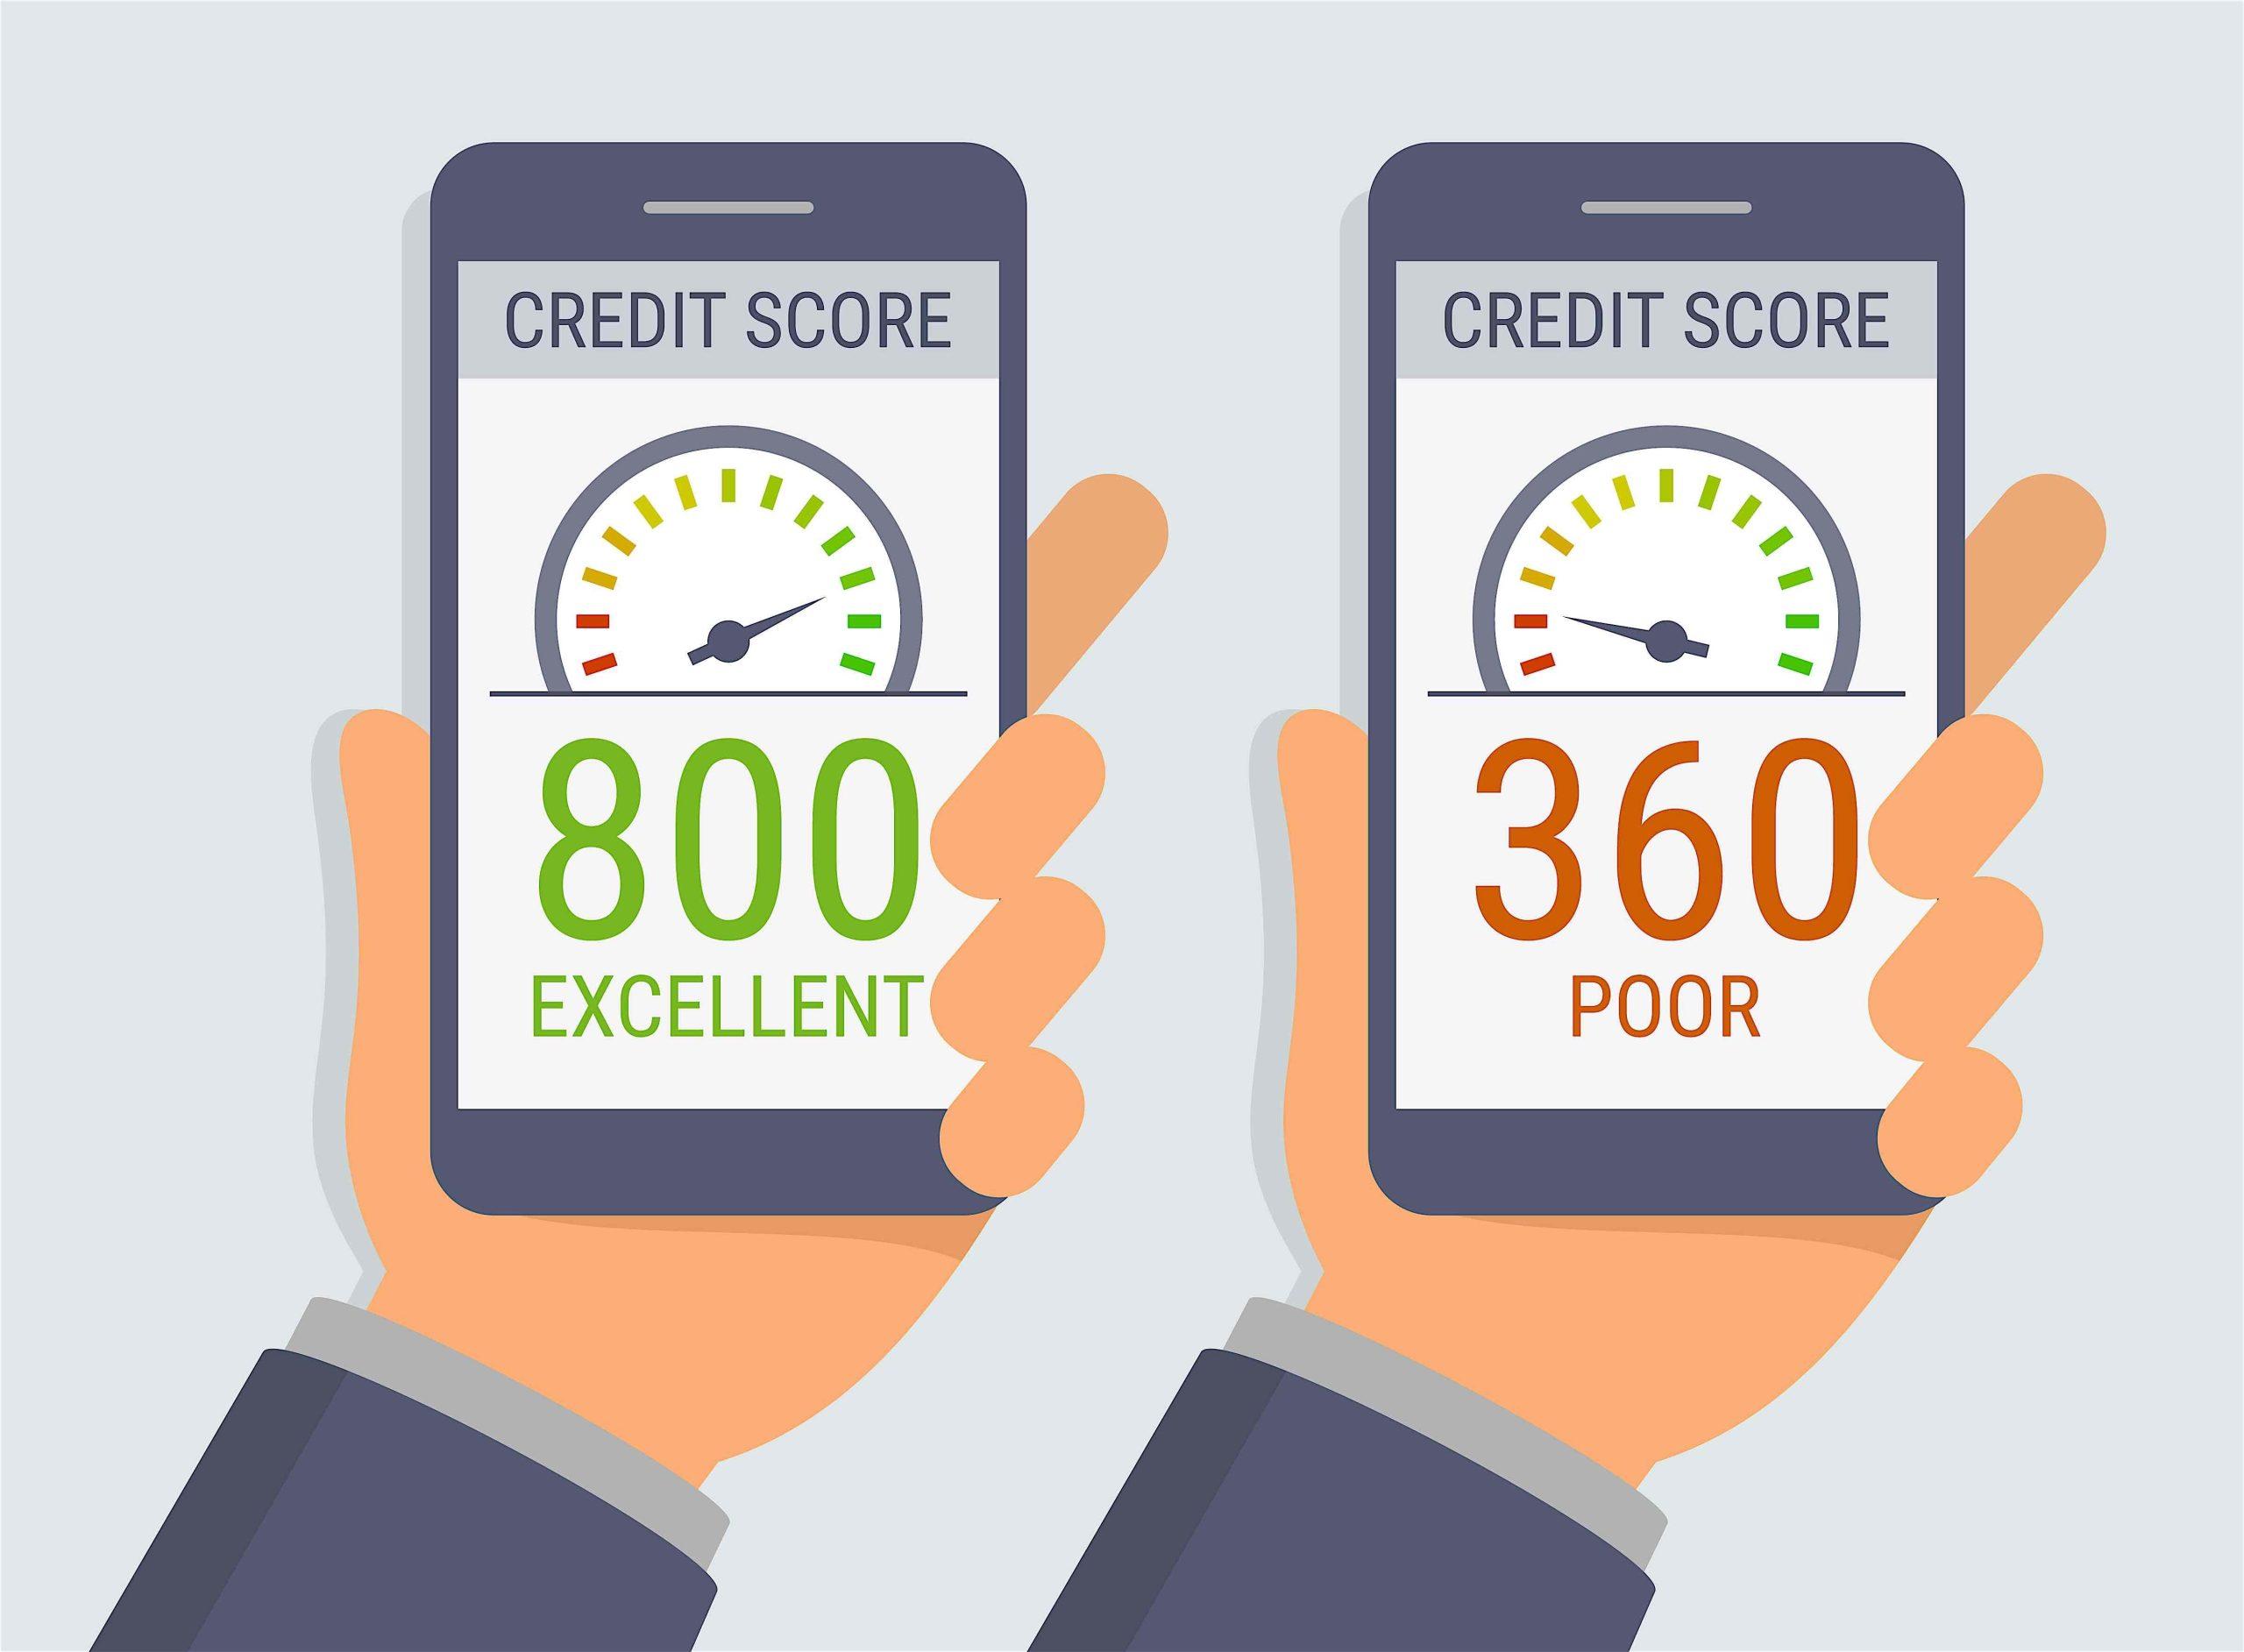 How long until real estate loans go away on your credit score